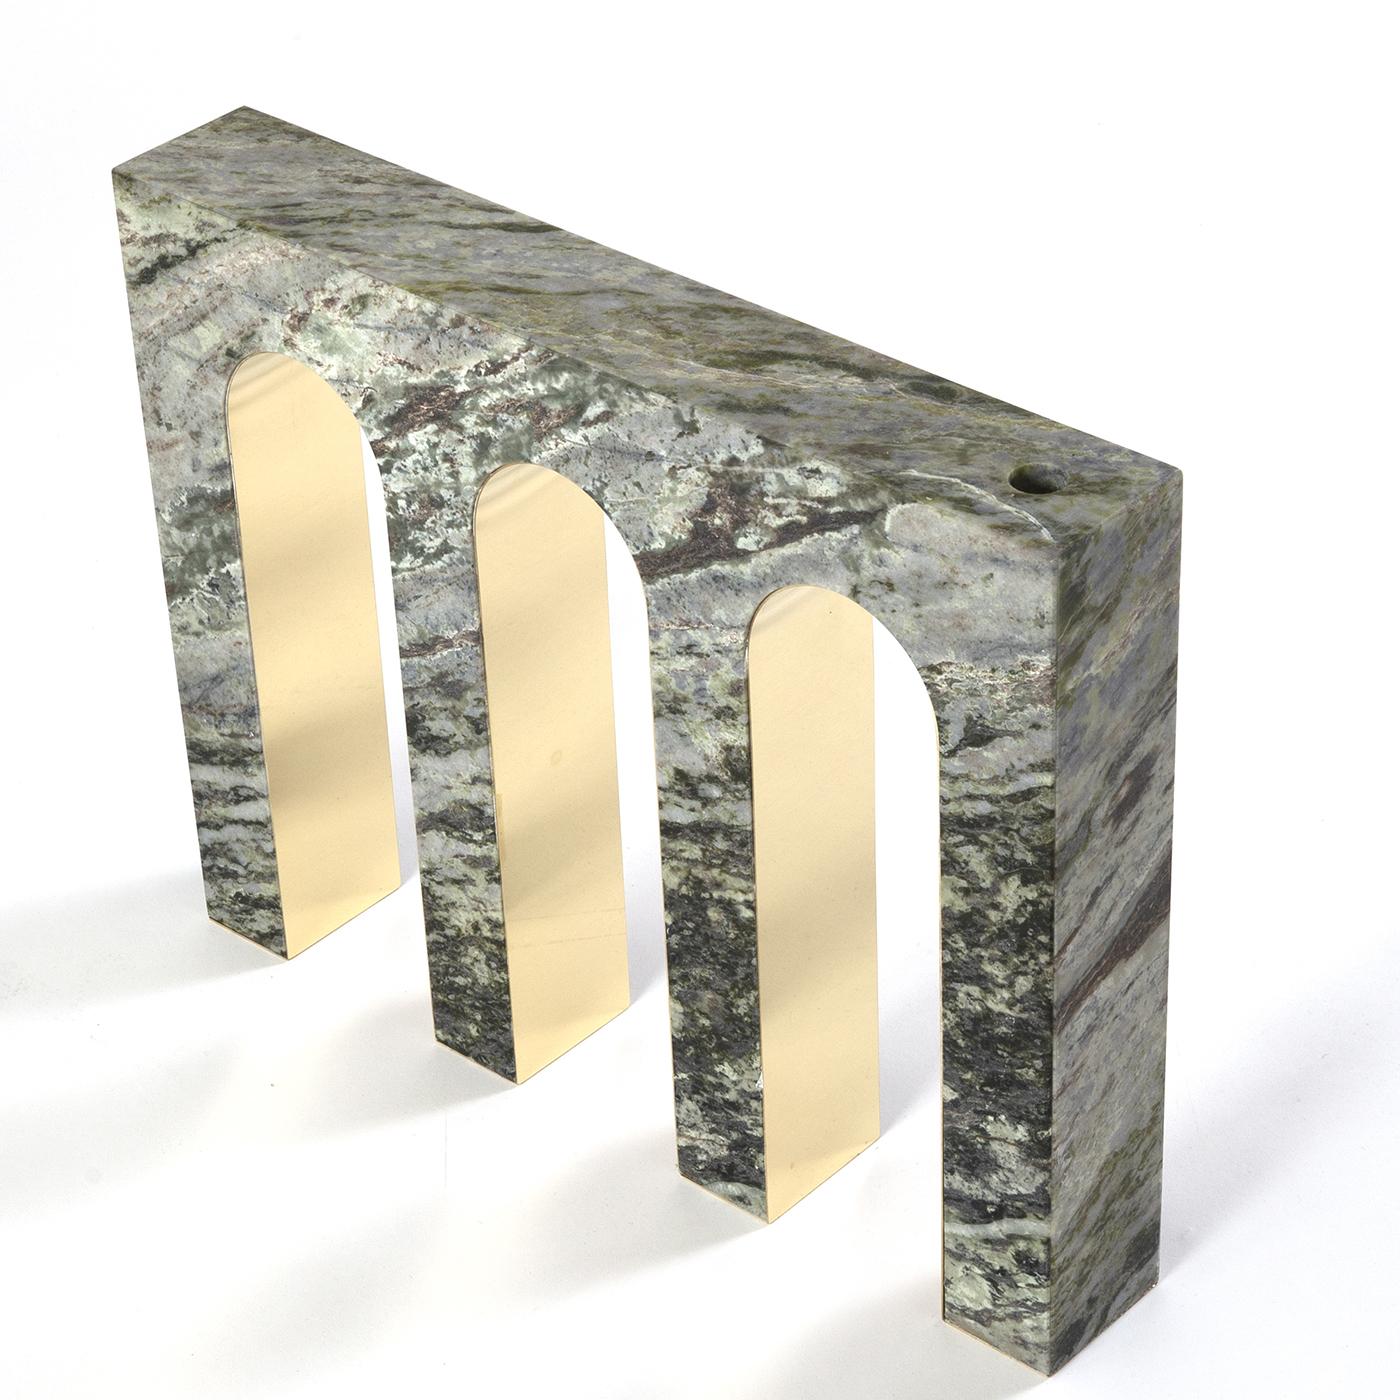 Merging classical inspiration and metaphysical art, inspired by the dream-like piazzas of De Chirico's paintings, this splendid vase is a sculptural masterpiece crafted of polished Irish Green marble. The top features a hole to insert floral